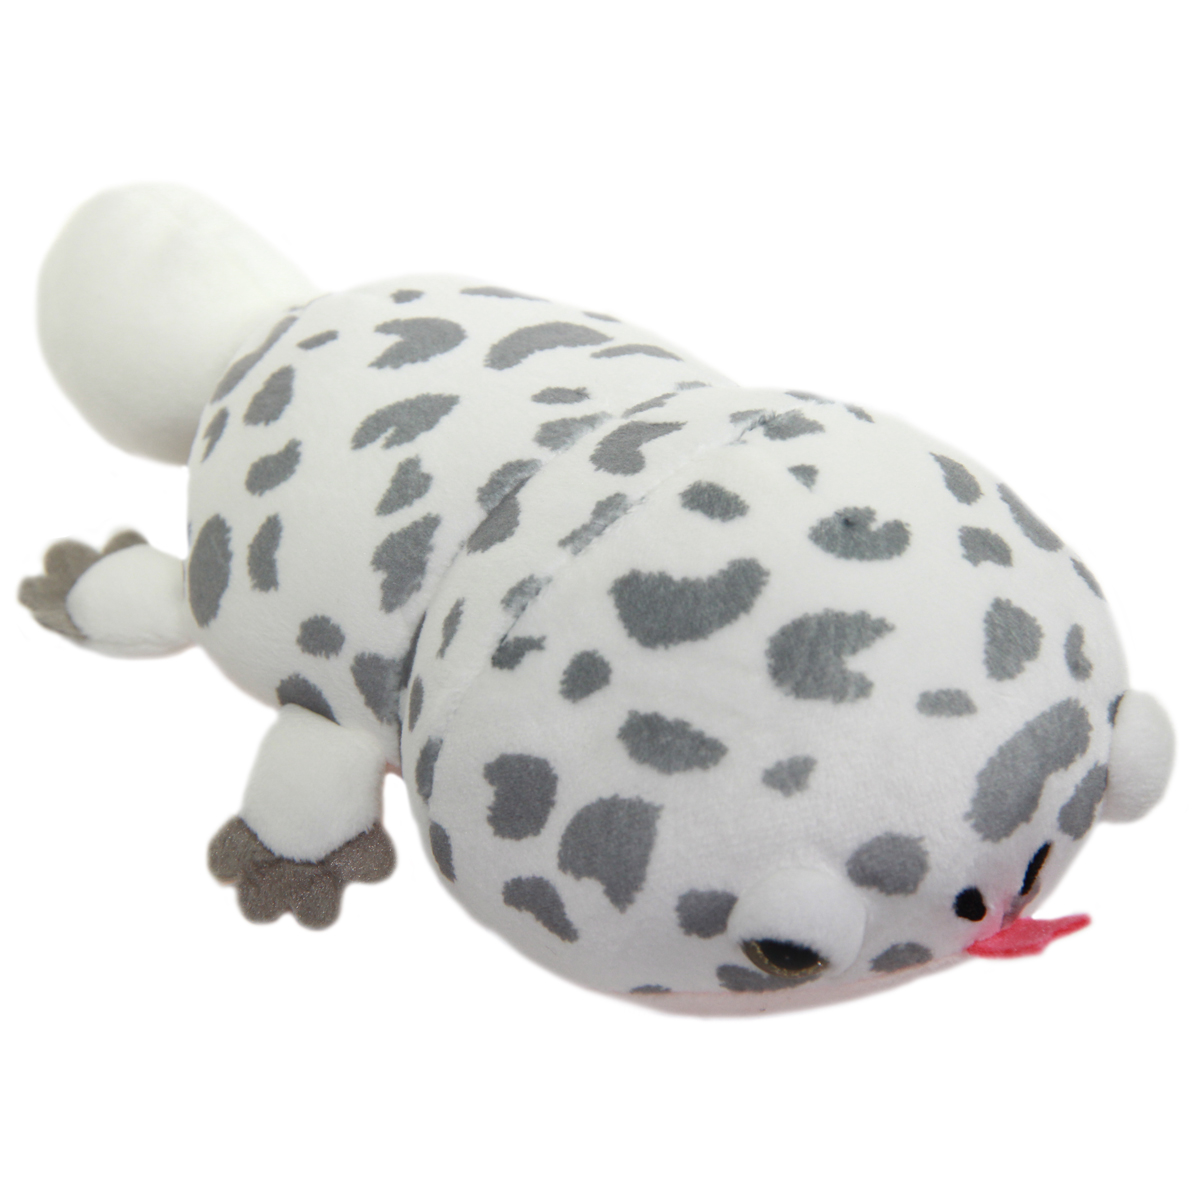 Leopard Gecko Plush Collection Lizard Plush Toy Super Soft Stuffed Animal White Grey 9 Inches